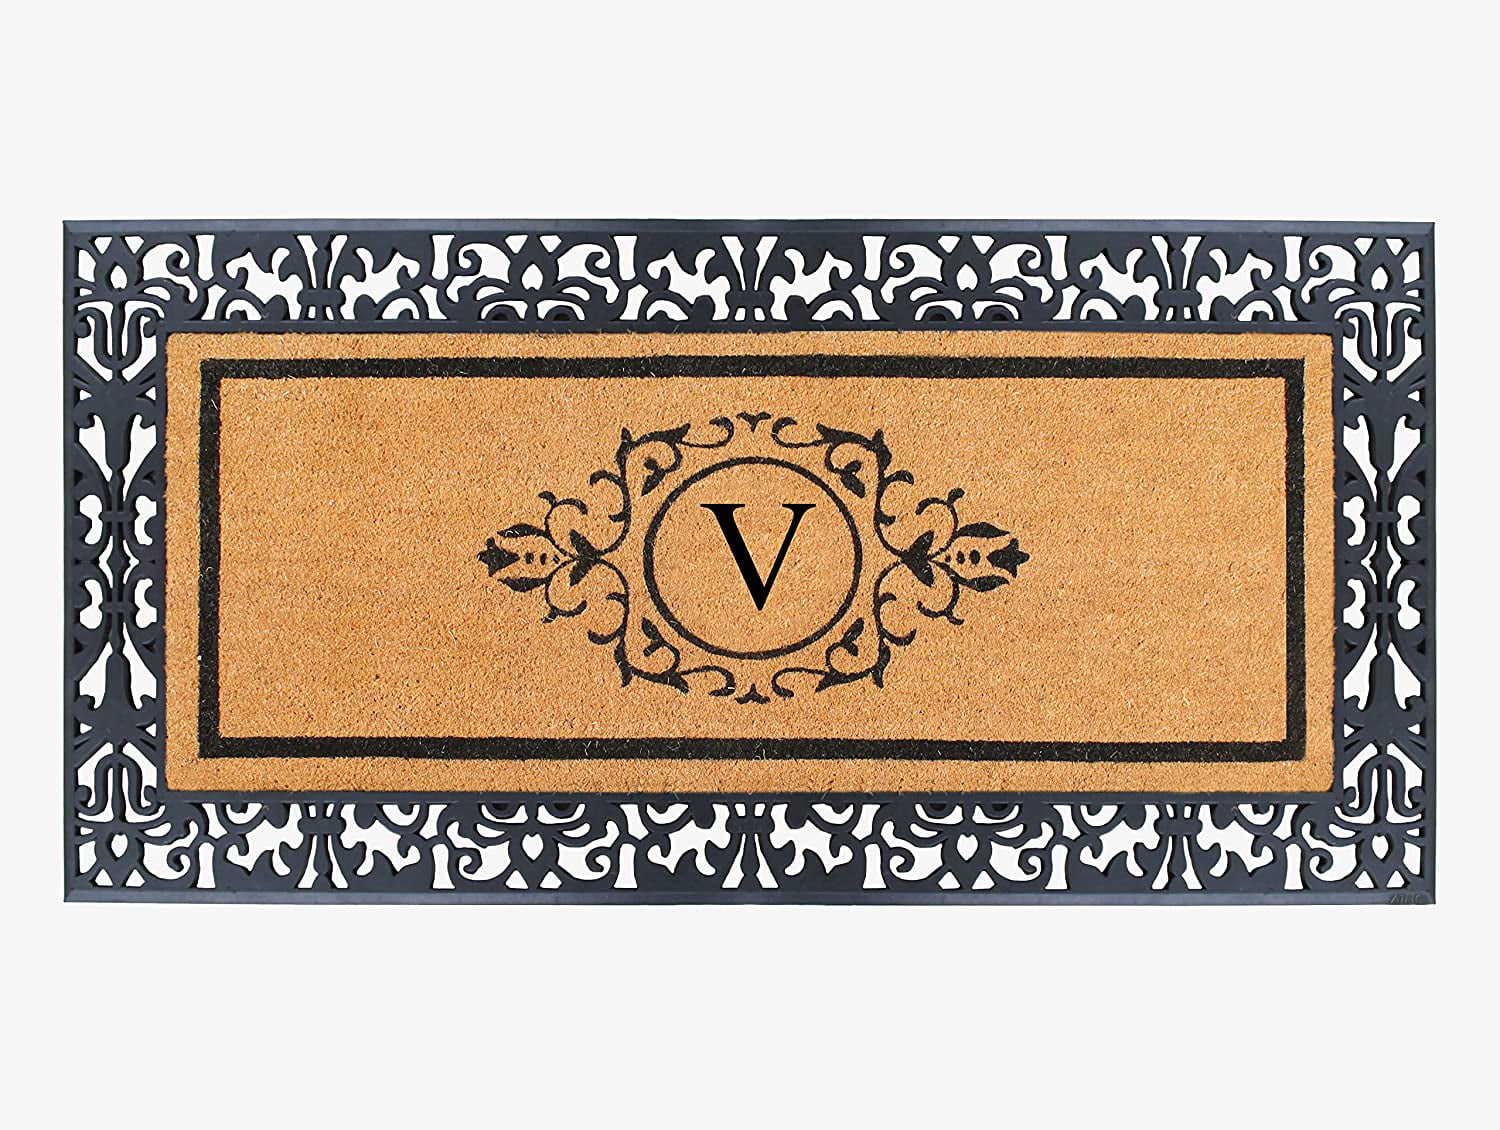 A1 Home Collections A1hc Beige 18 in. x 30 in. Natural Coir Heavy Duty PVC Backing Outdoor Monogrammed V Door Mat